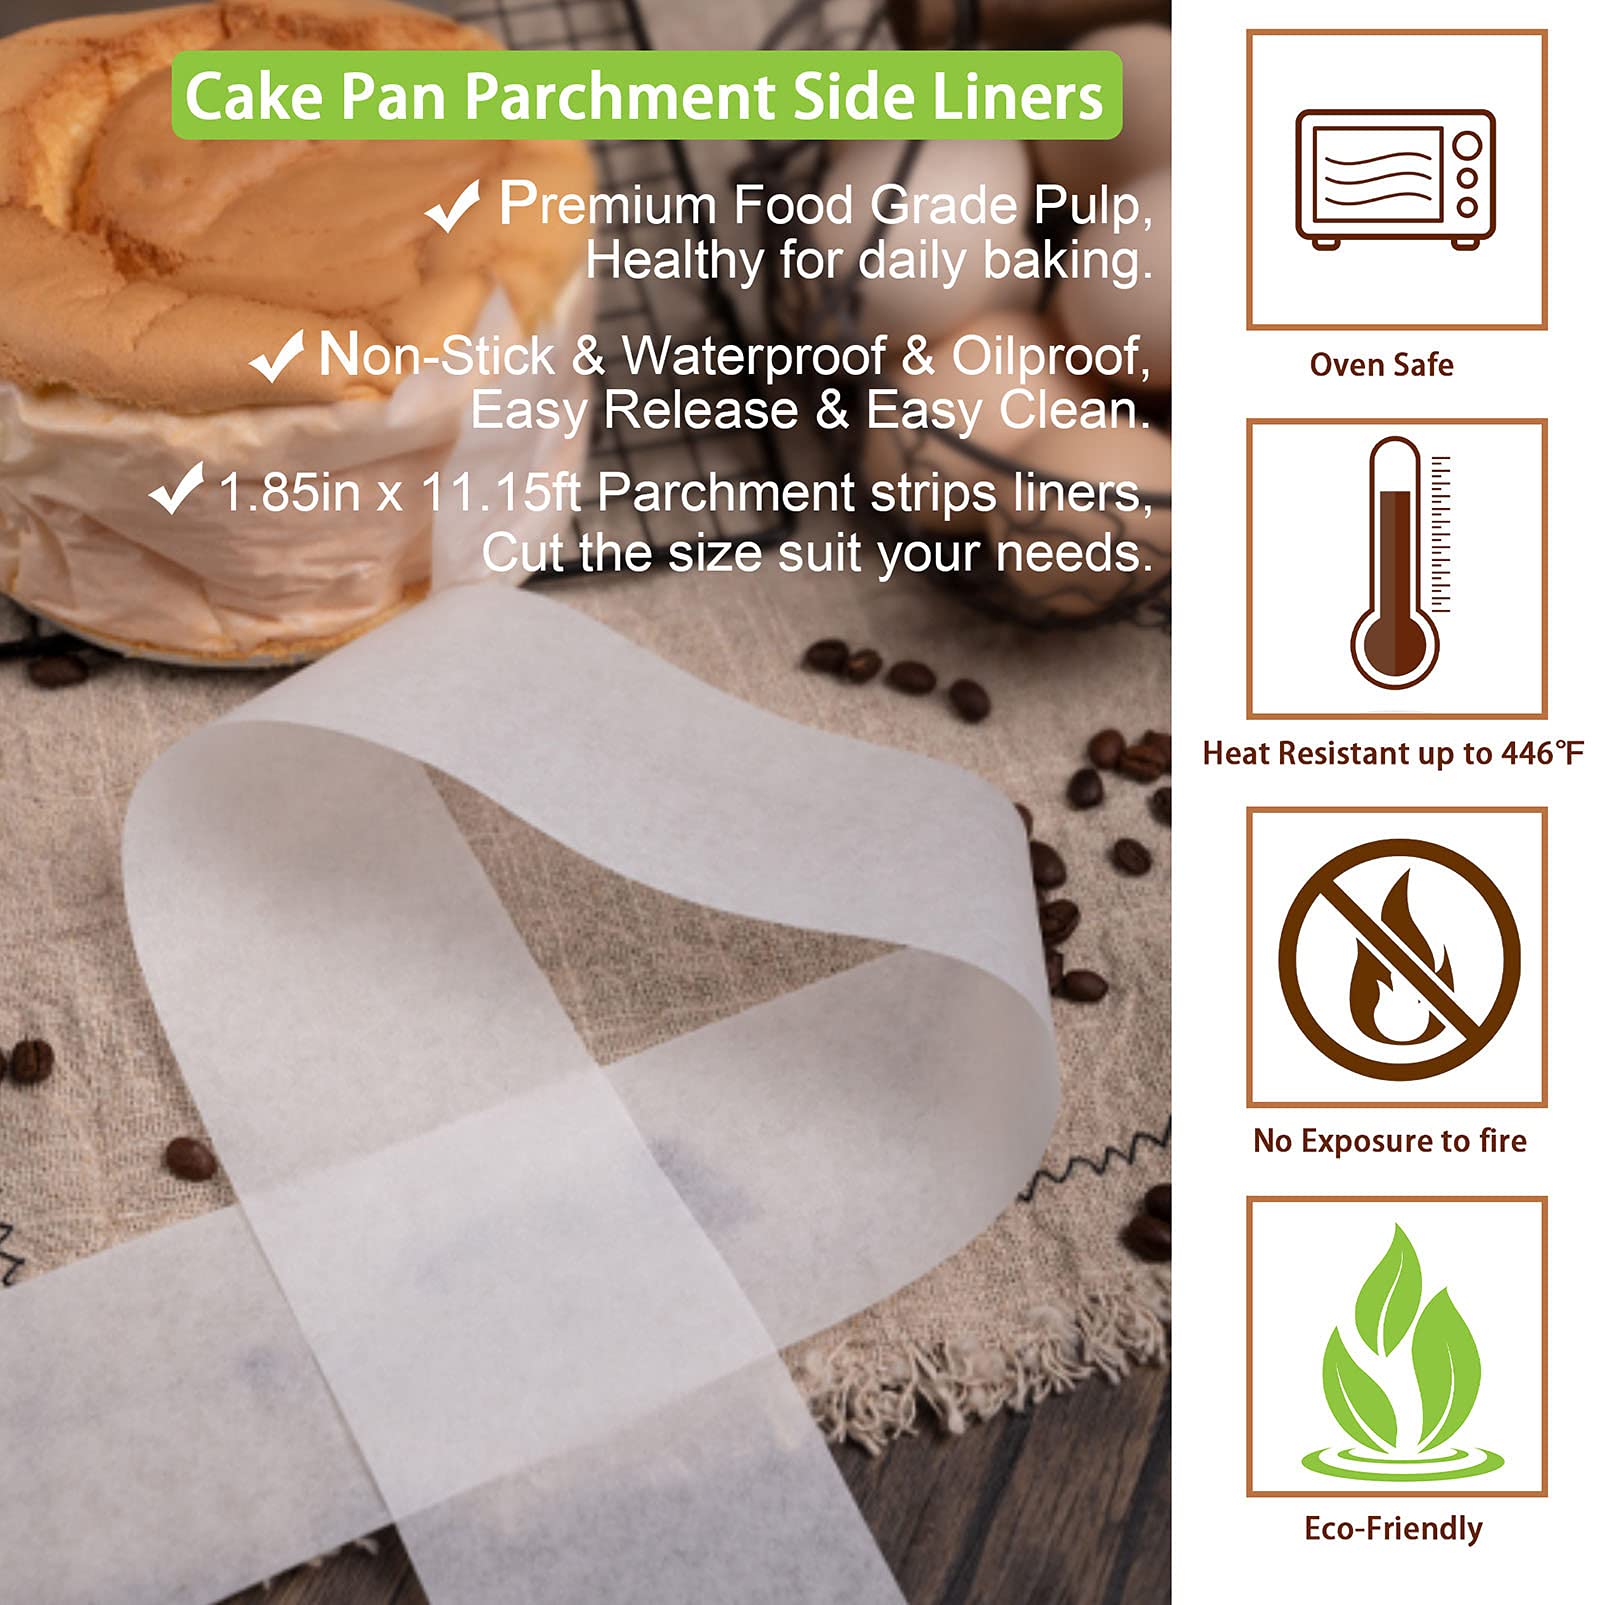 TeamFar Cake Pan Liner, 1.85in x 111ft Parchment Paper Liner Roll, Nonstick Side Liner for Baking Roasting, Healthy & Non-Stick, Heat Resistant & Water Proof-2 Rolls